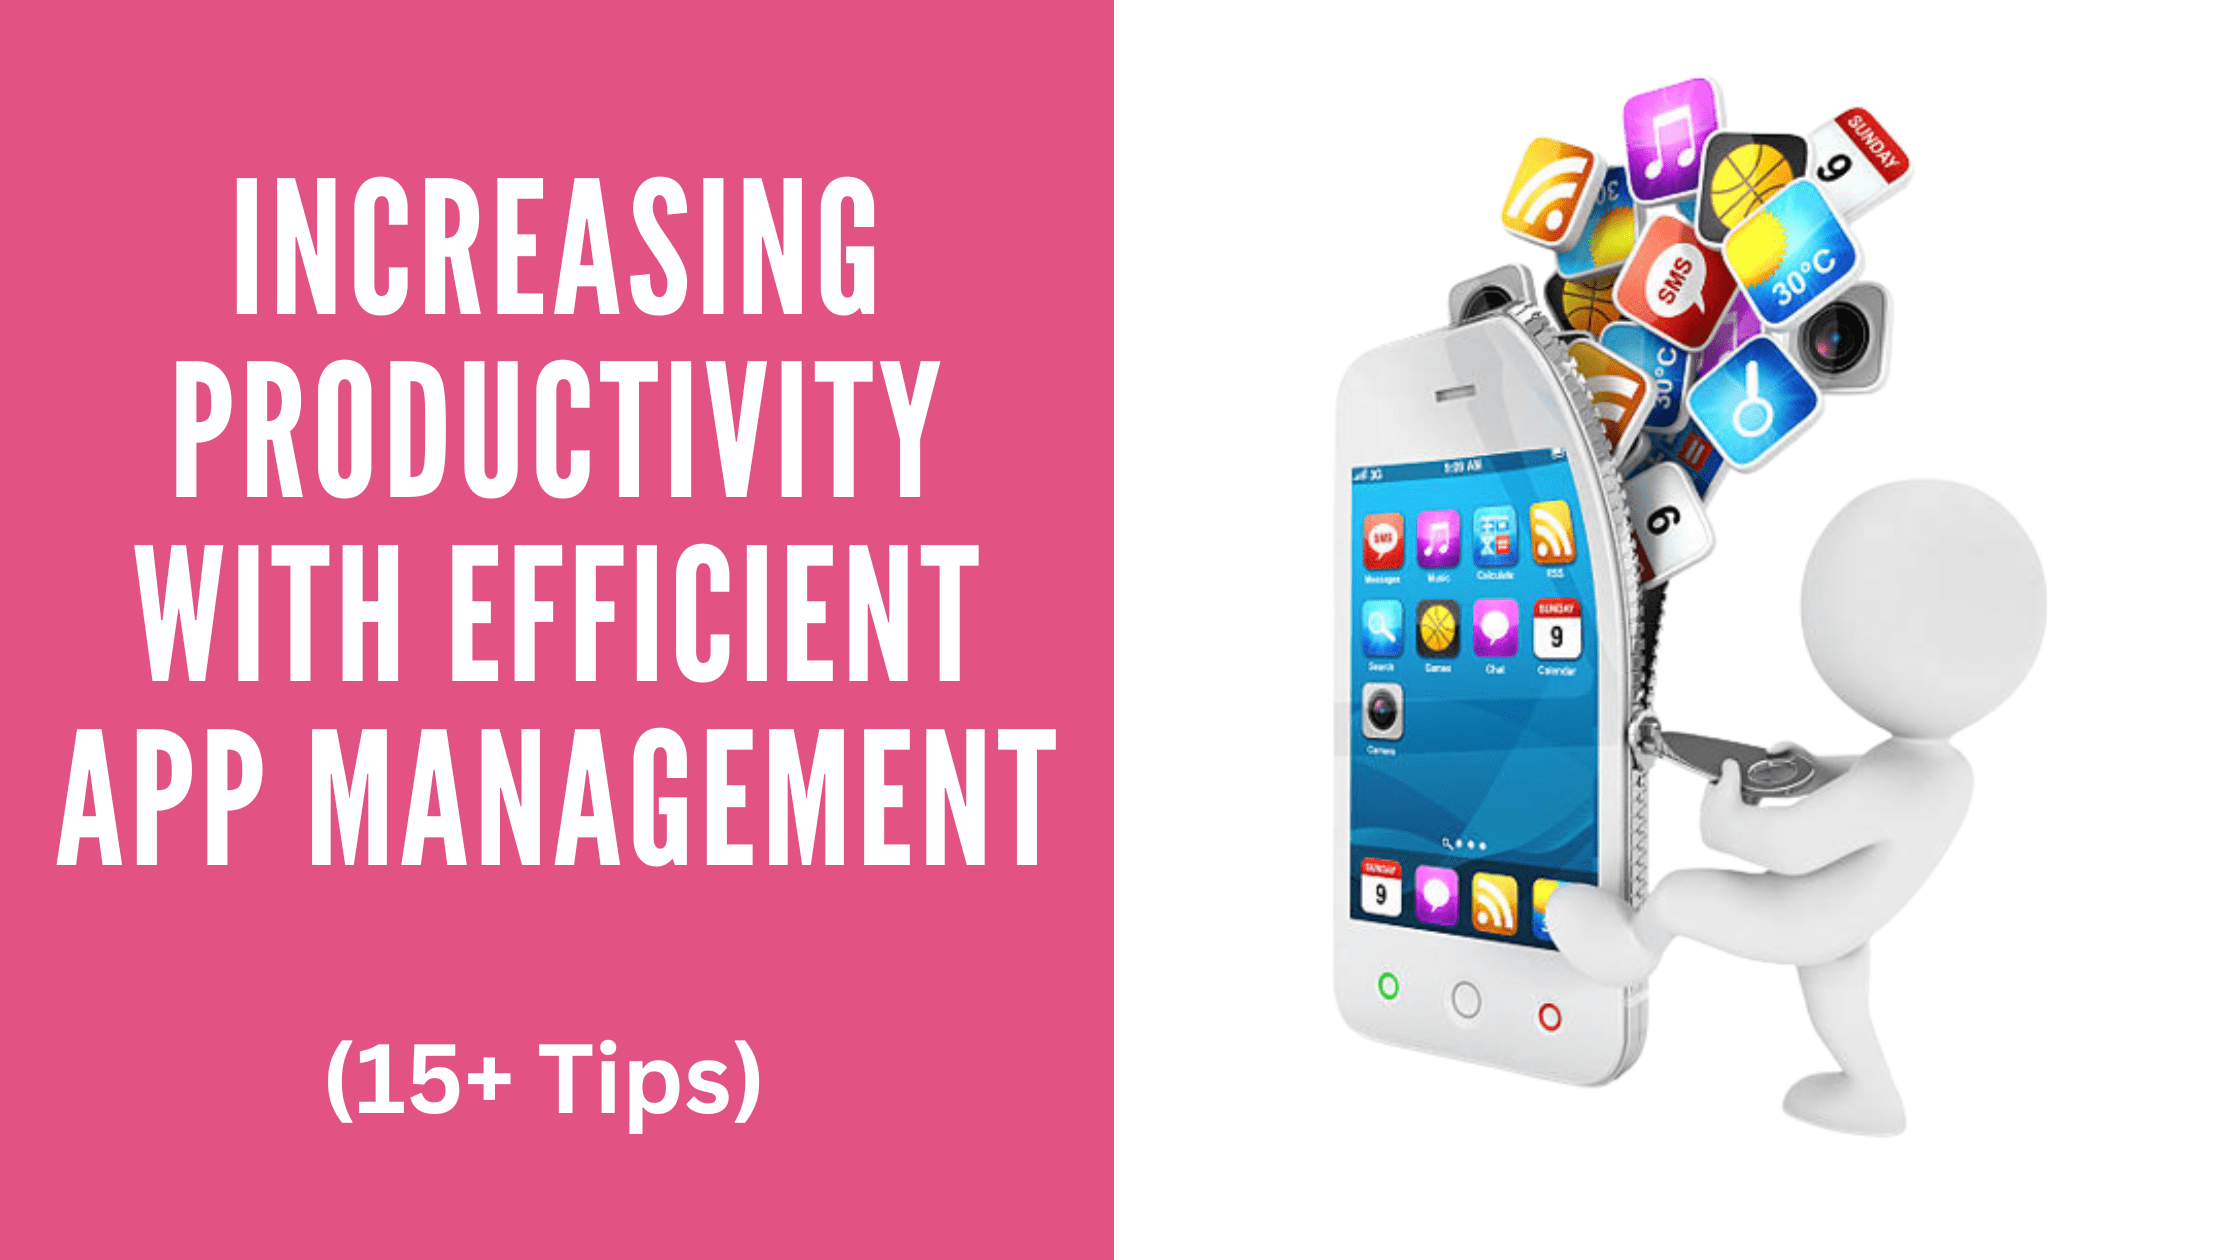 Increasing Productivity with Efficient App Management